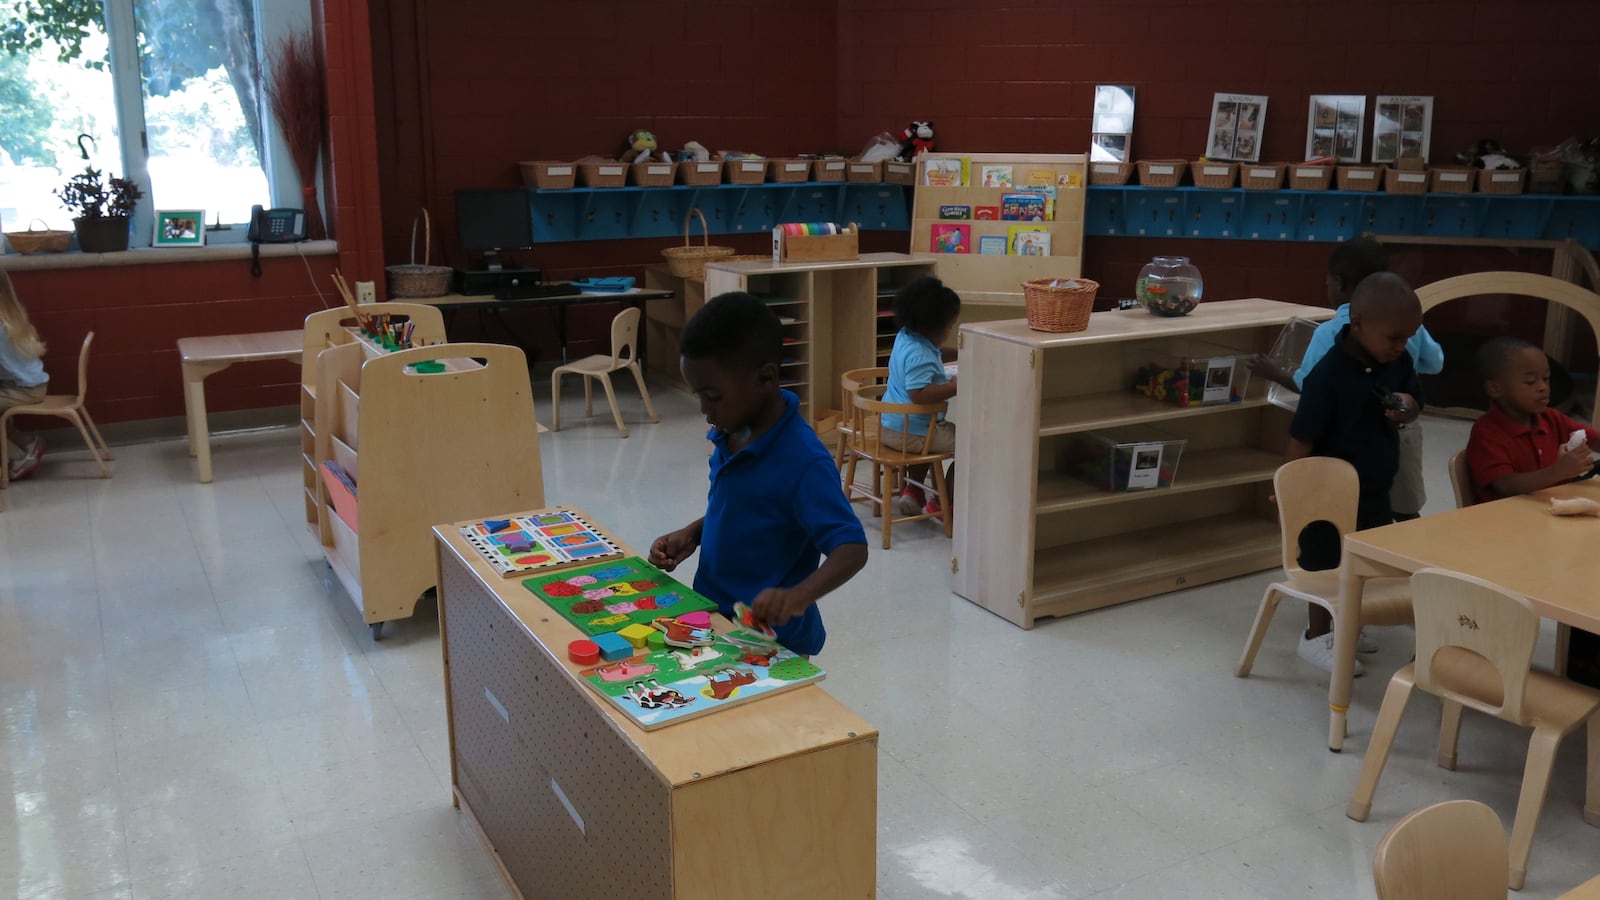 Students at Ross Early Learning Center, a pre-kindergarten center in Nashville